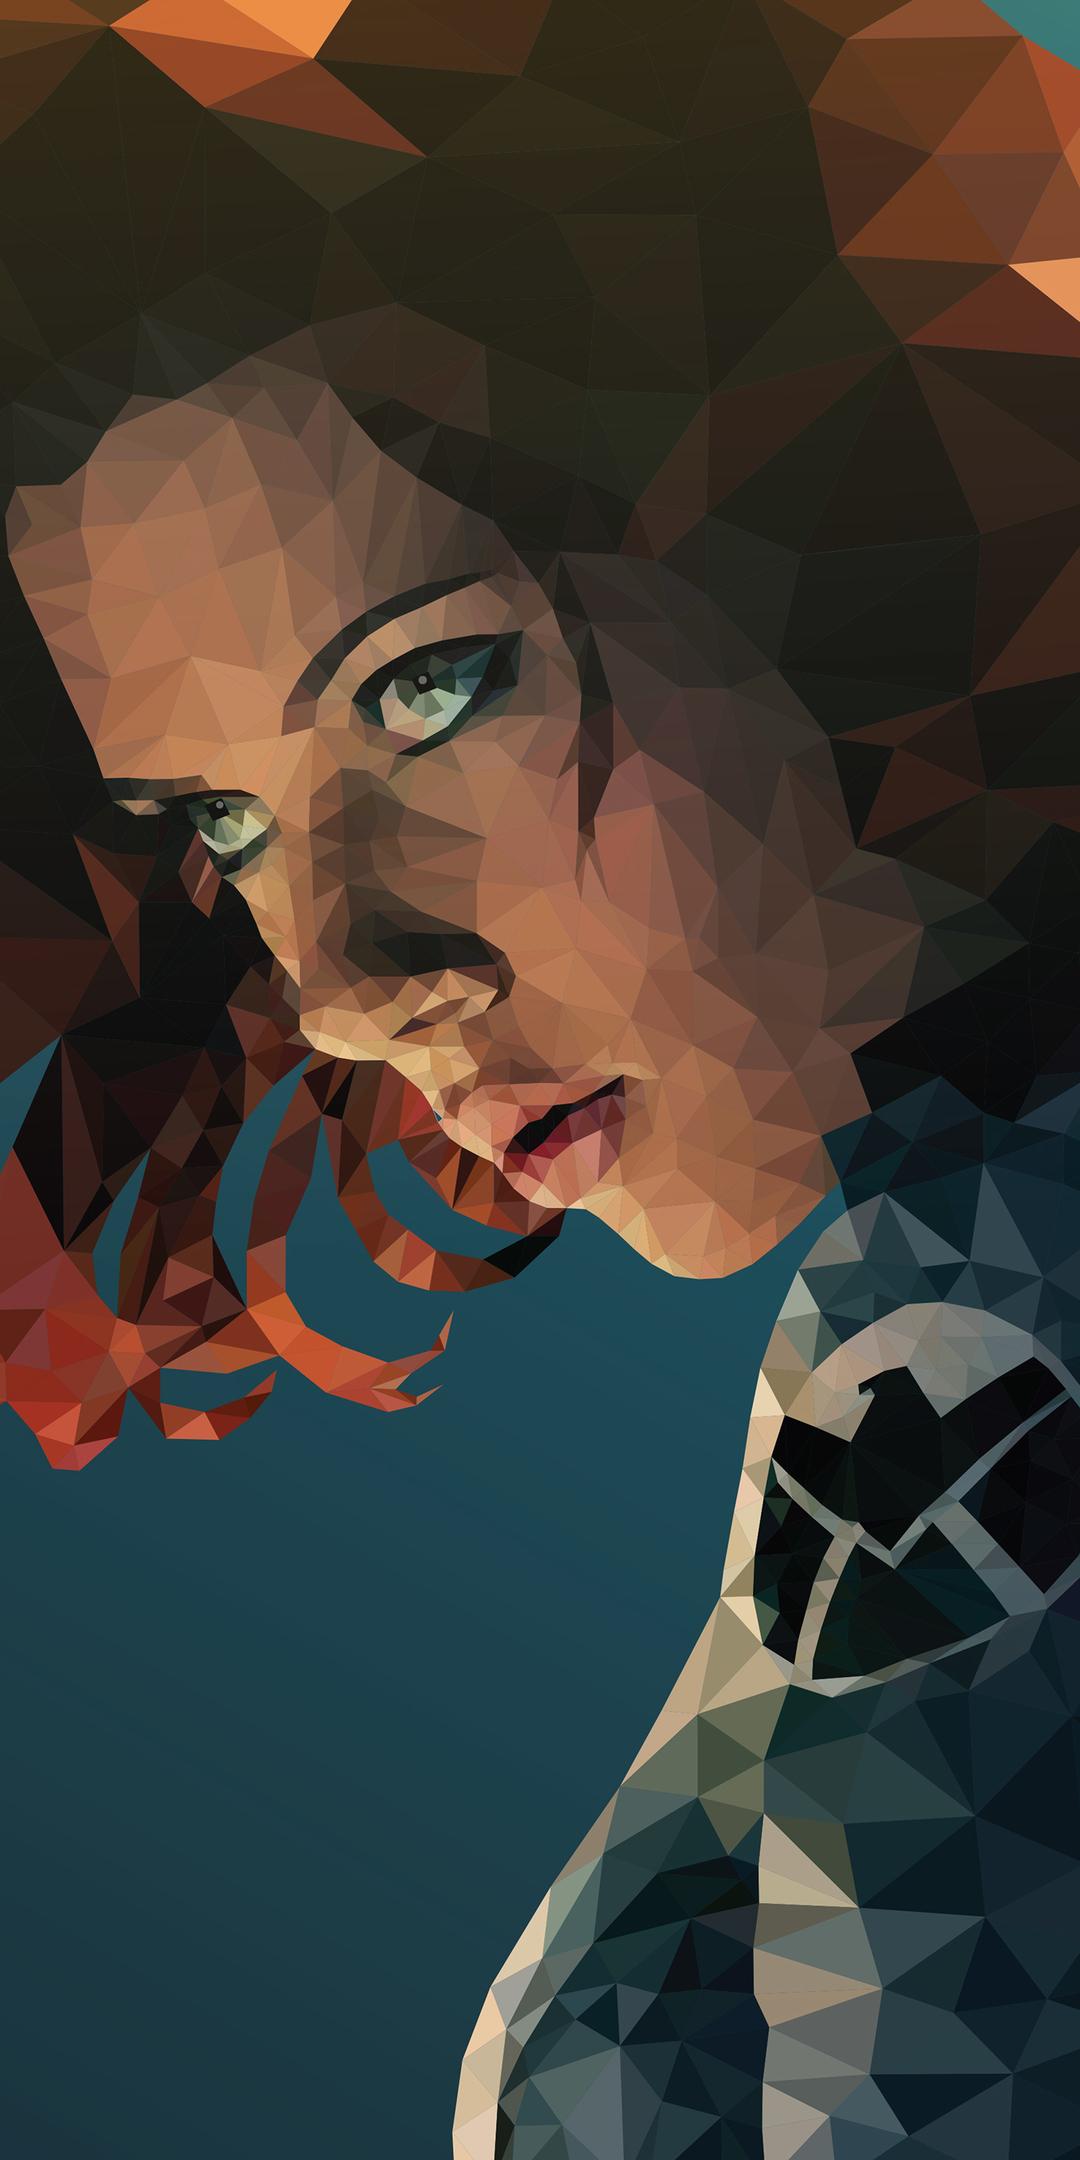 Black Widow Low Poly Art One Plus 5T, Honor 7x, Honor view